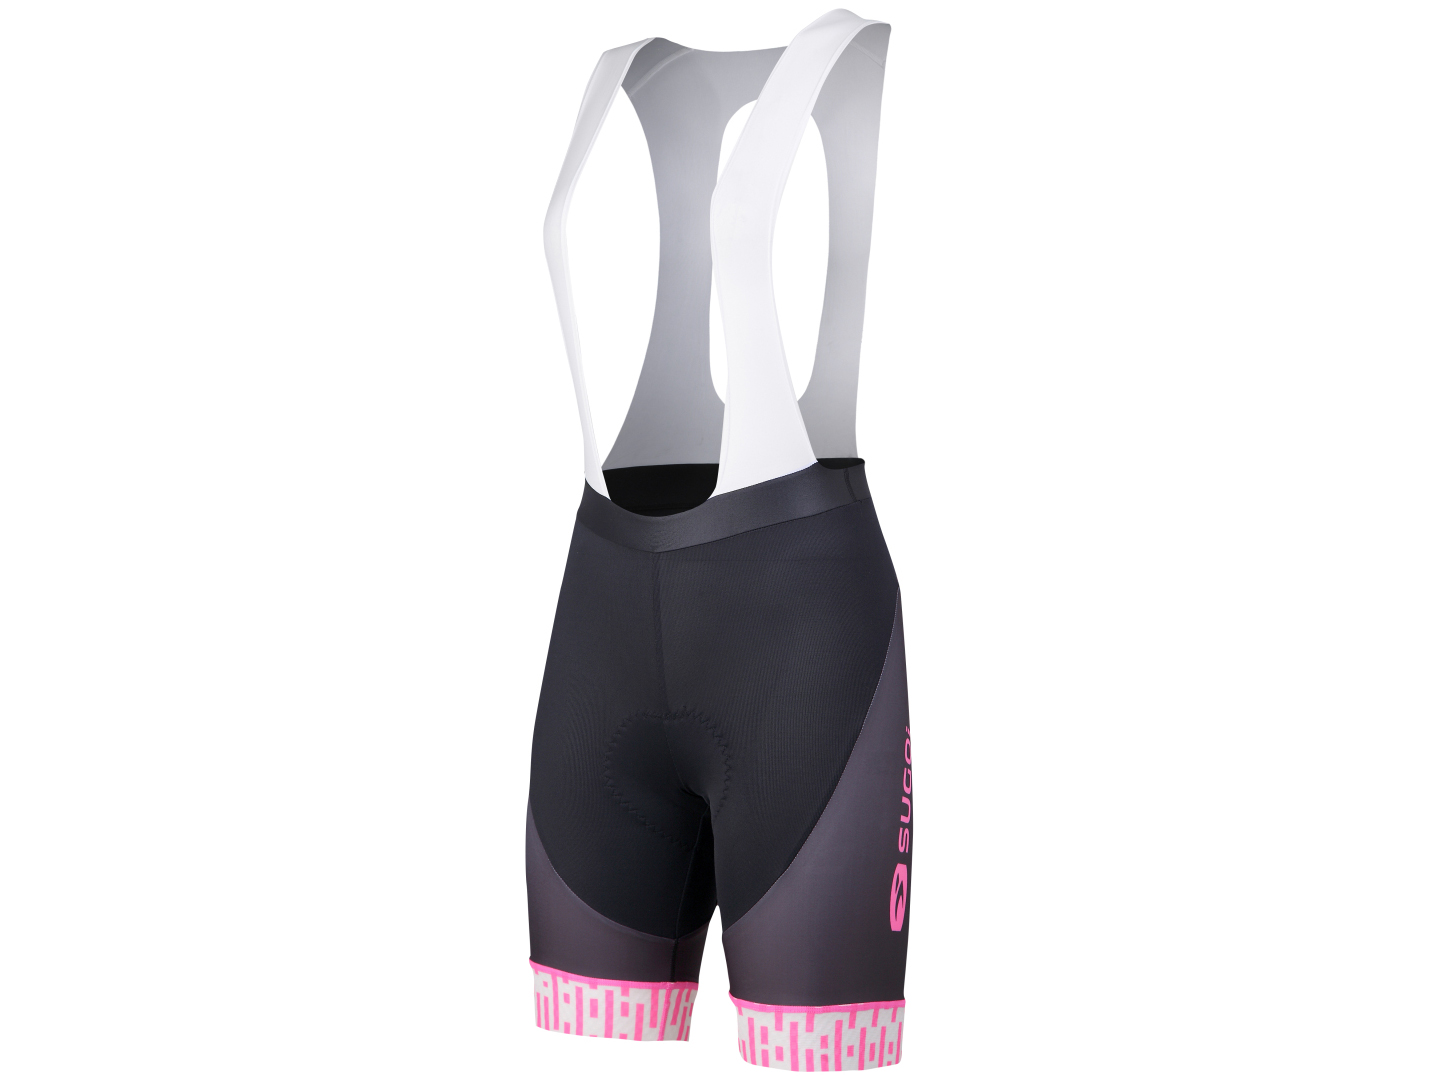  Lady’s knitted bicycle Bib short with pad